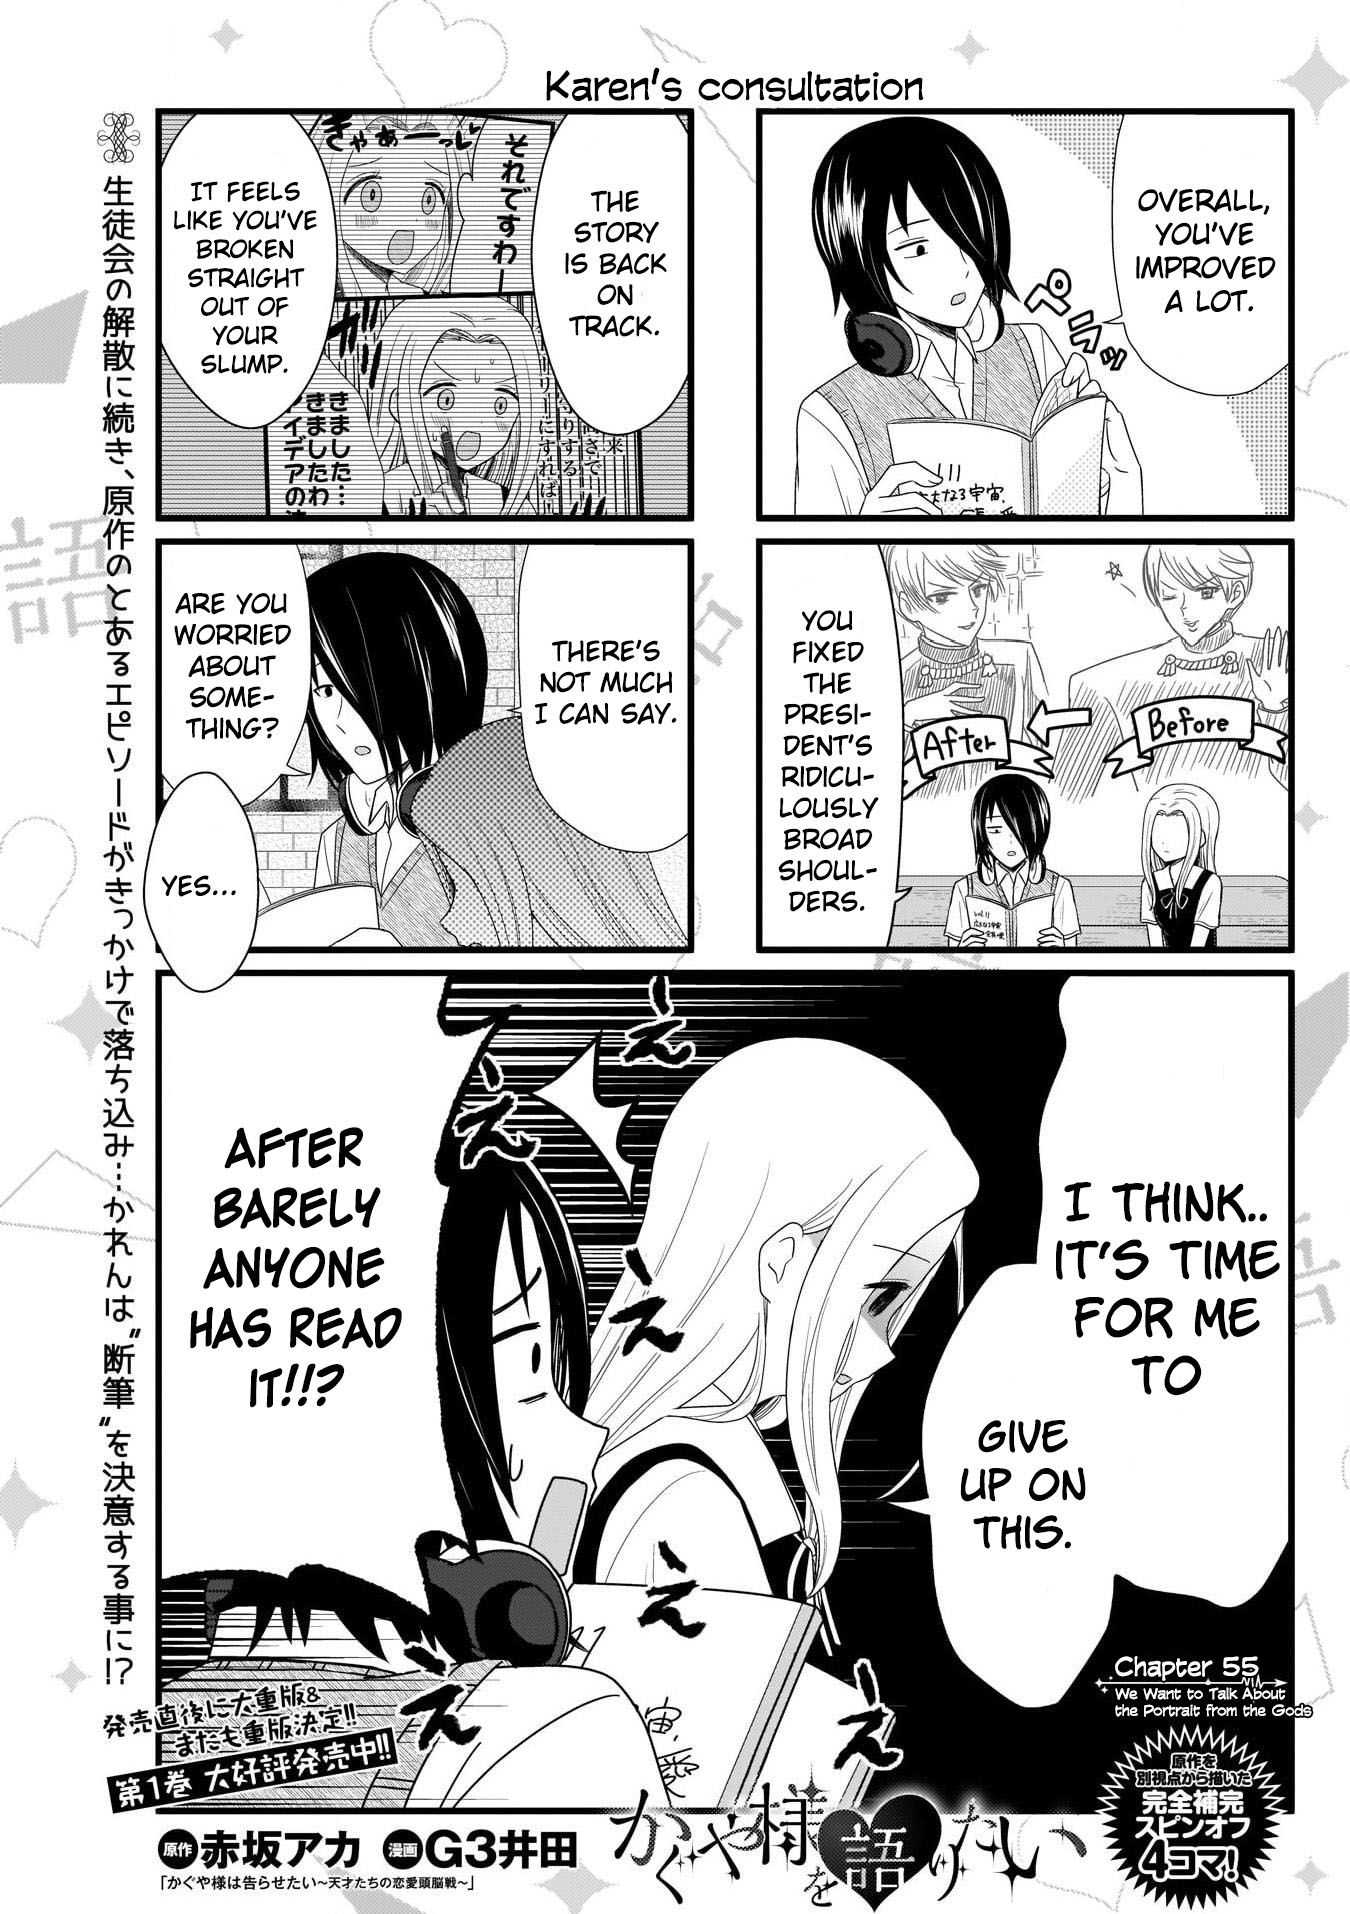 We Want To Talk About Kaguya Chapter 55 Page 1